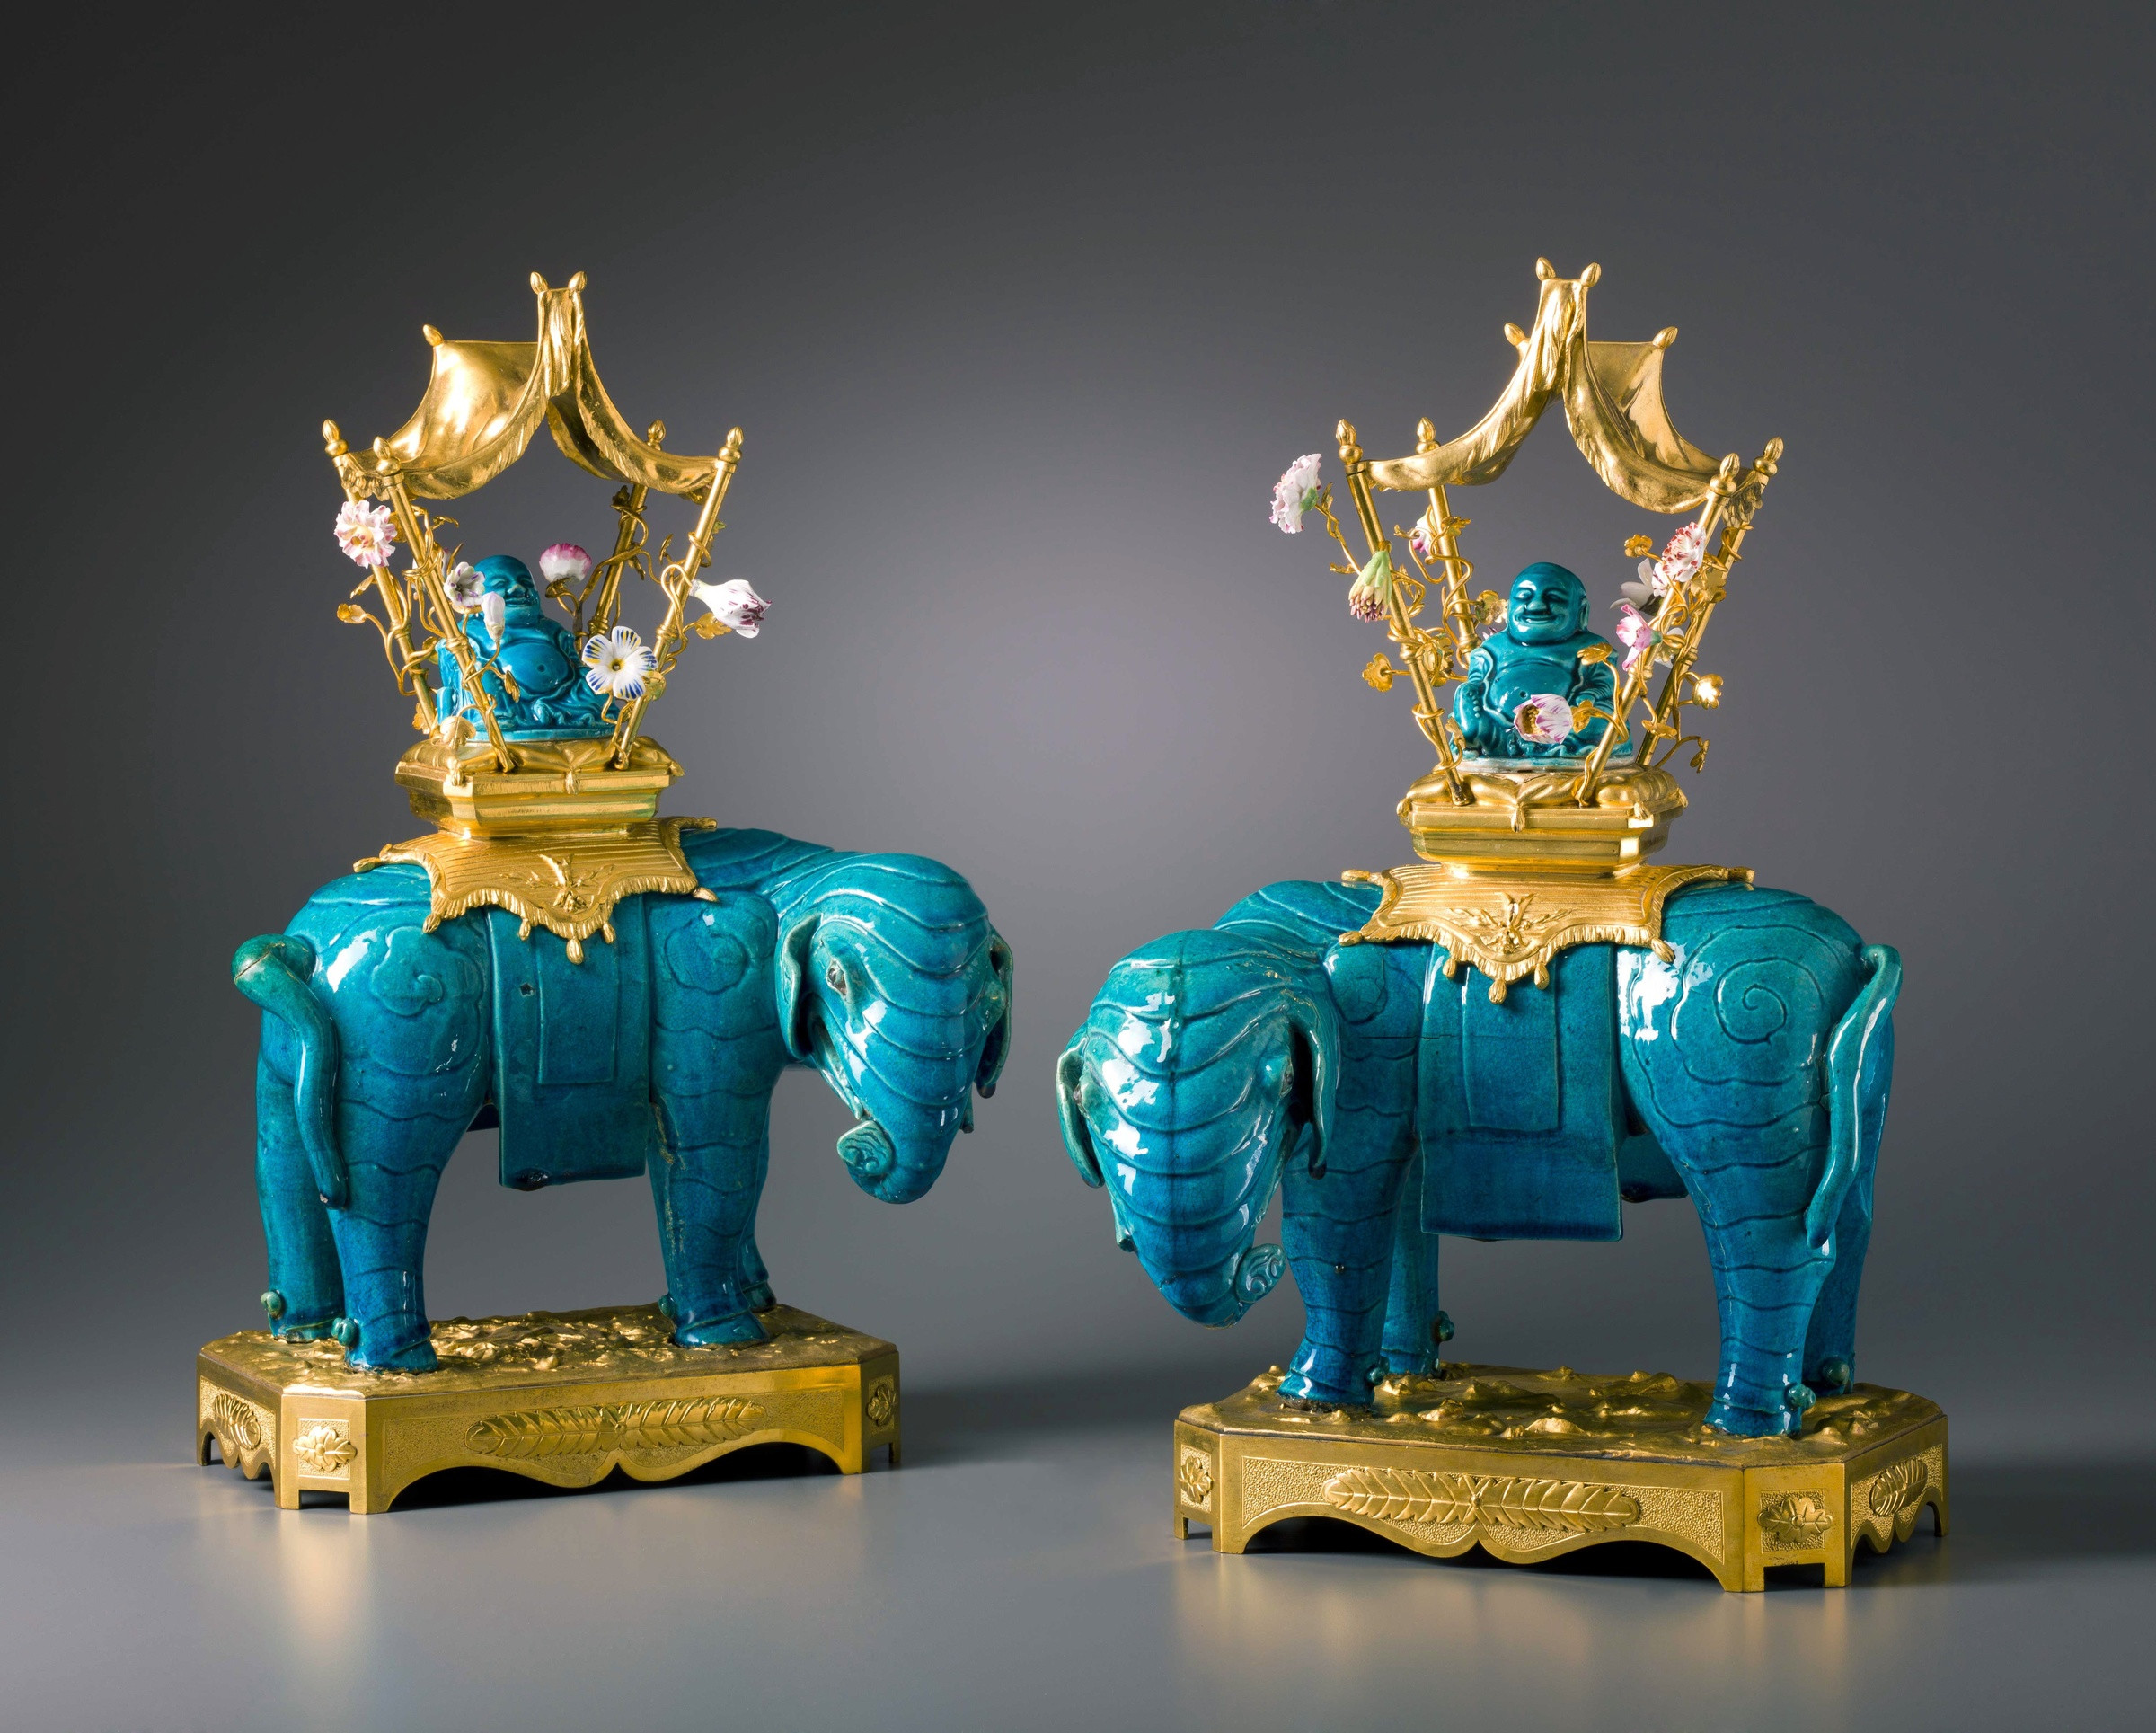 30 Fashionable Qianlong Vase Value 2024 free download qianlong vase value of unknown a pair of louis xv gilt bronze mounted ming dynasty for a pair of louis xv gilt bronze mounted ming dynasty elephants with qing dynasty buddhas